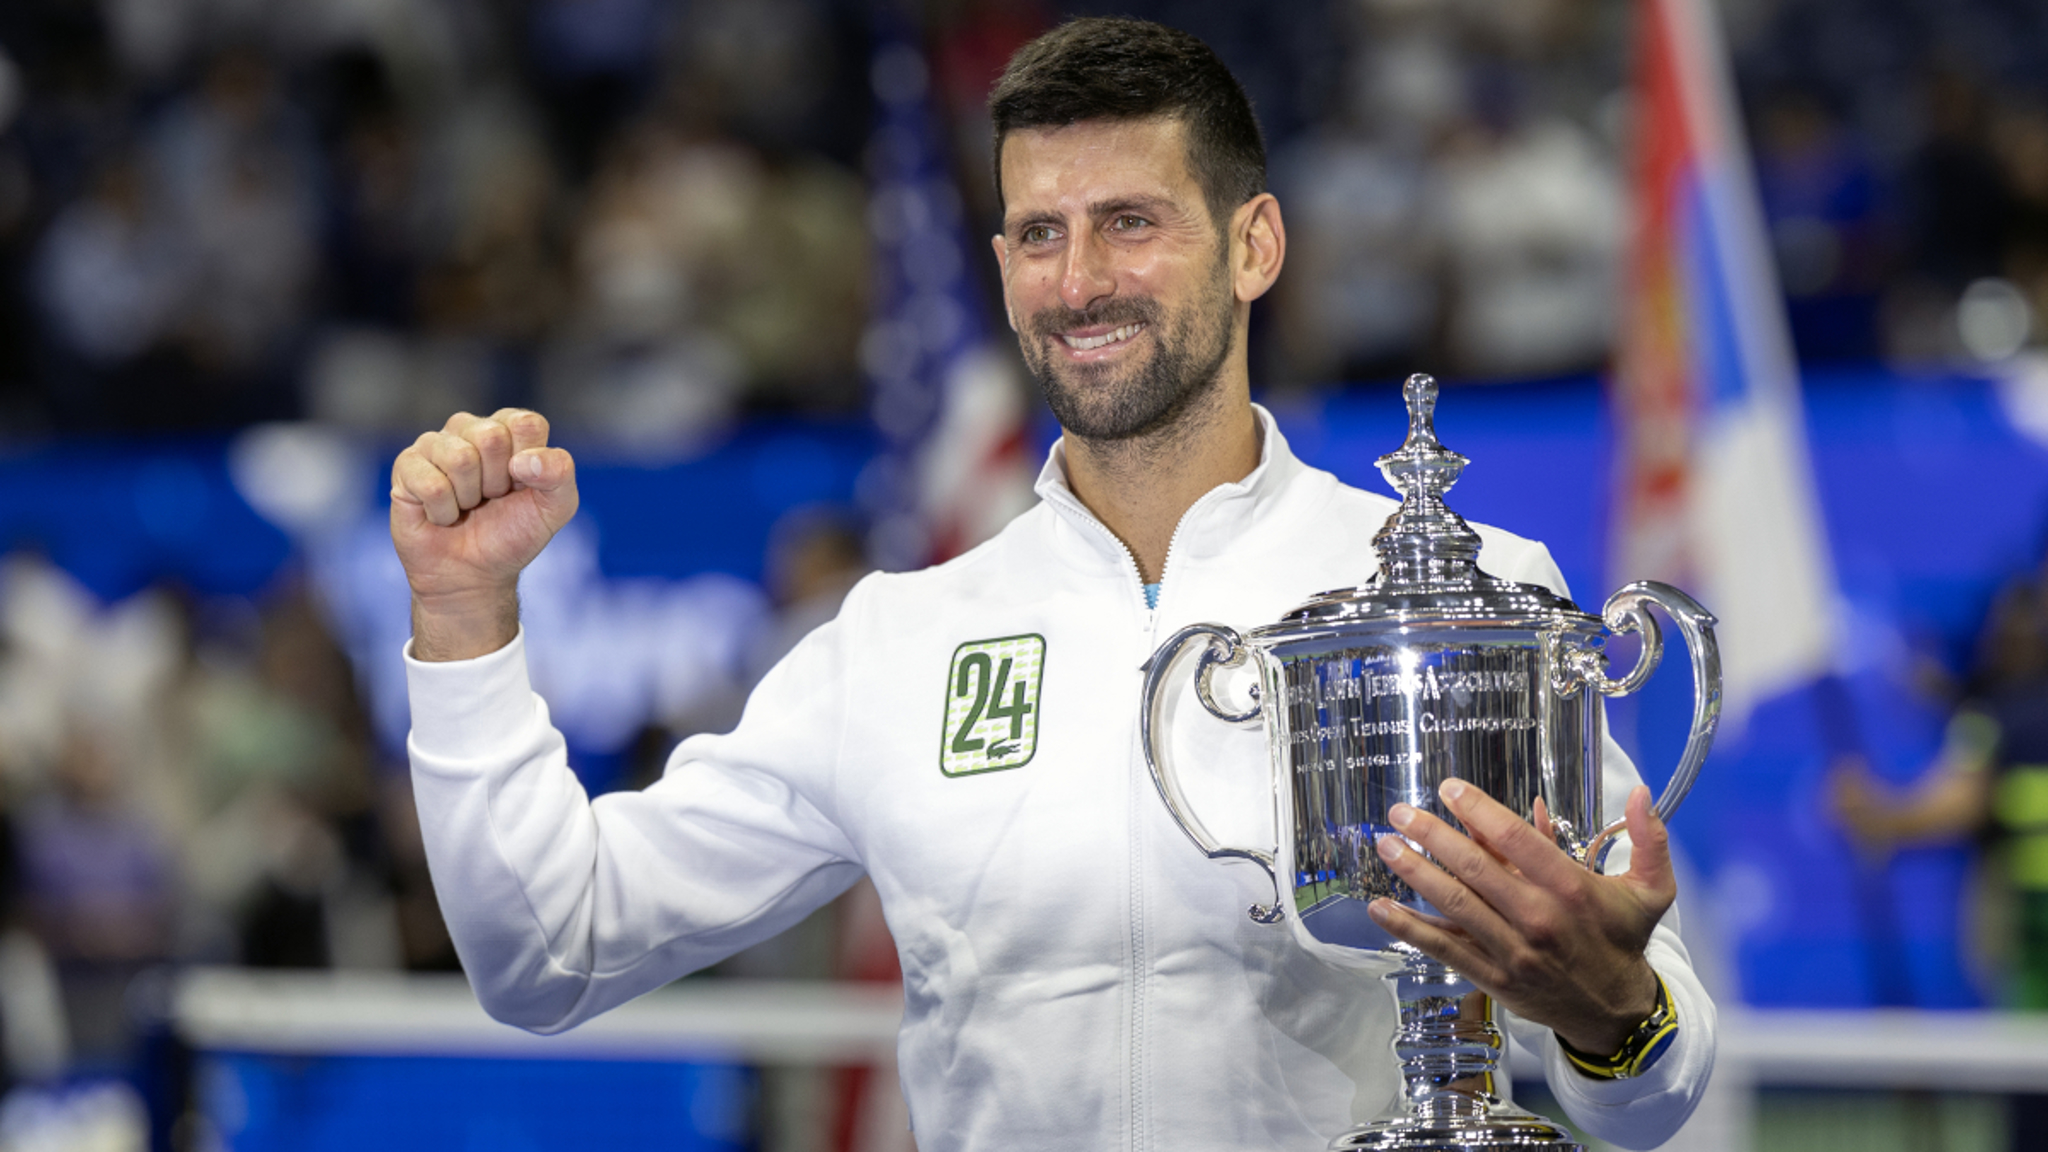 Djokovic not setting any limit on Grand Slam titles | SuperSport